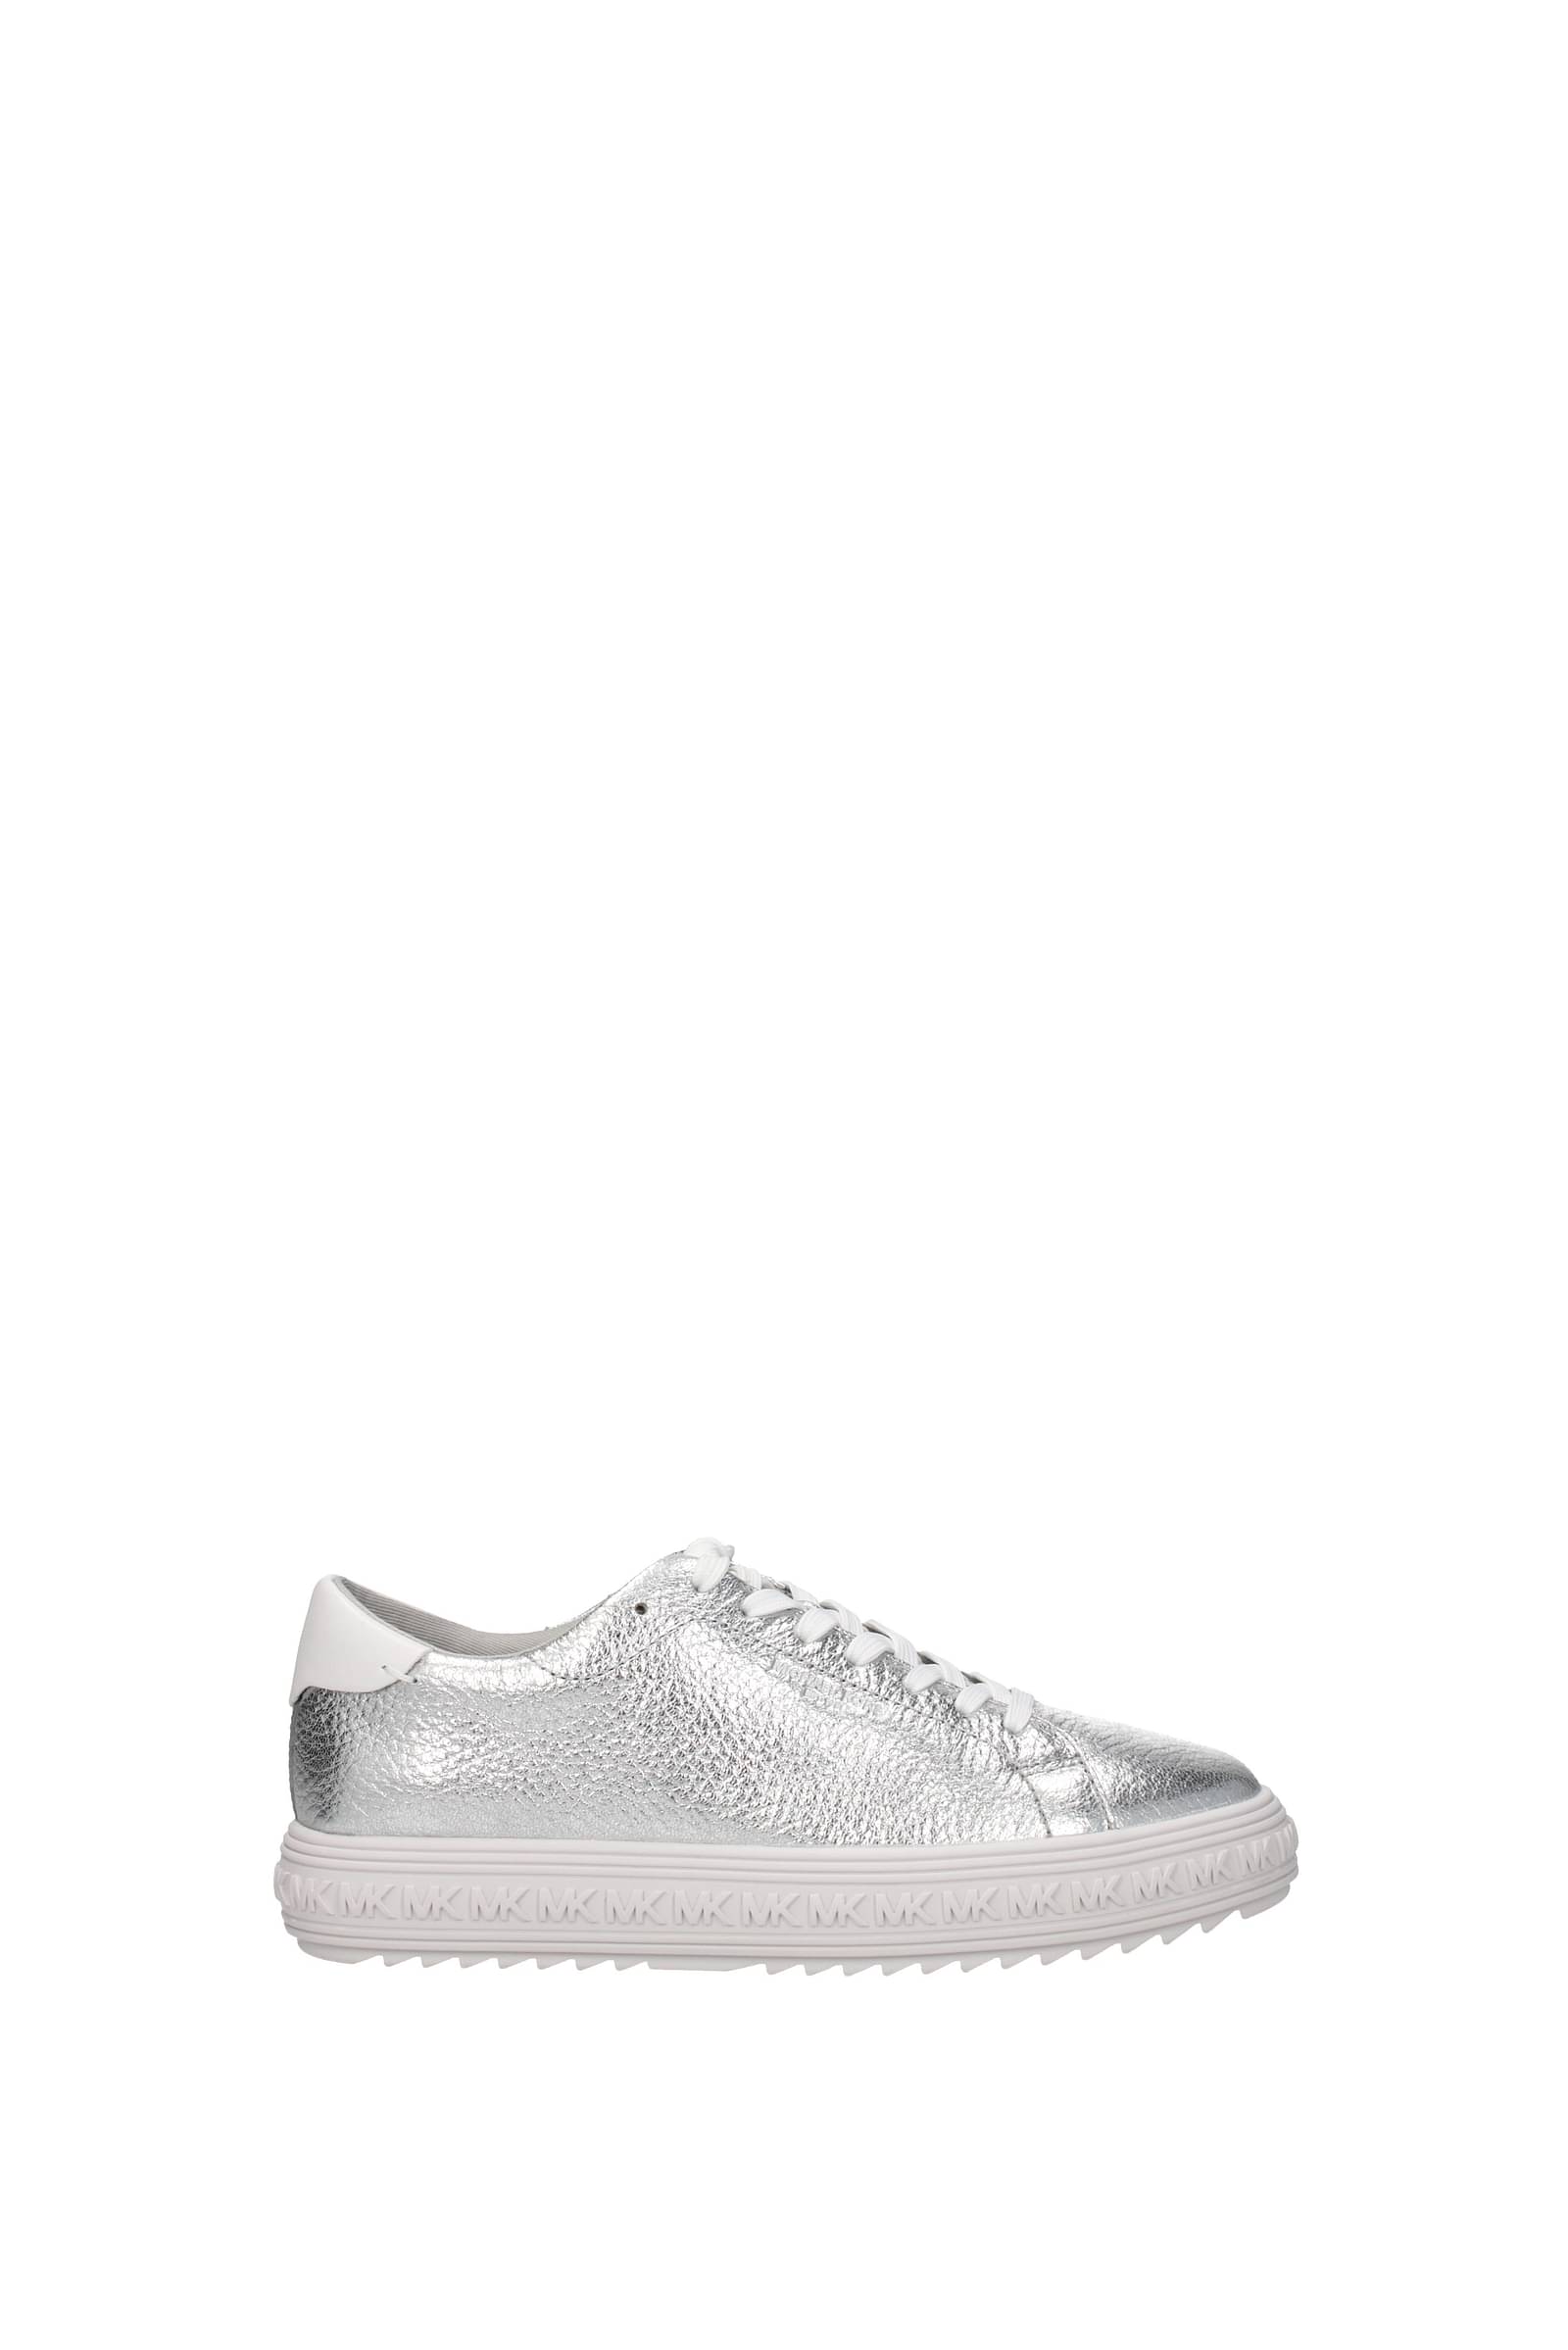 Trainers Michael Kors  Irving glitter silver sneakers  43R8IRFS1M040